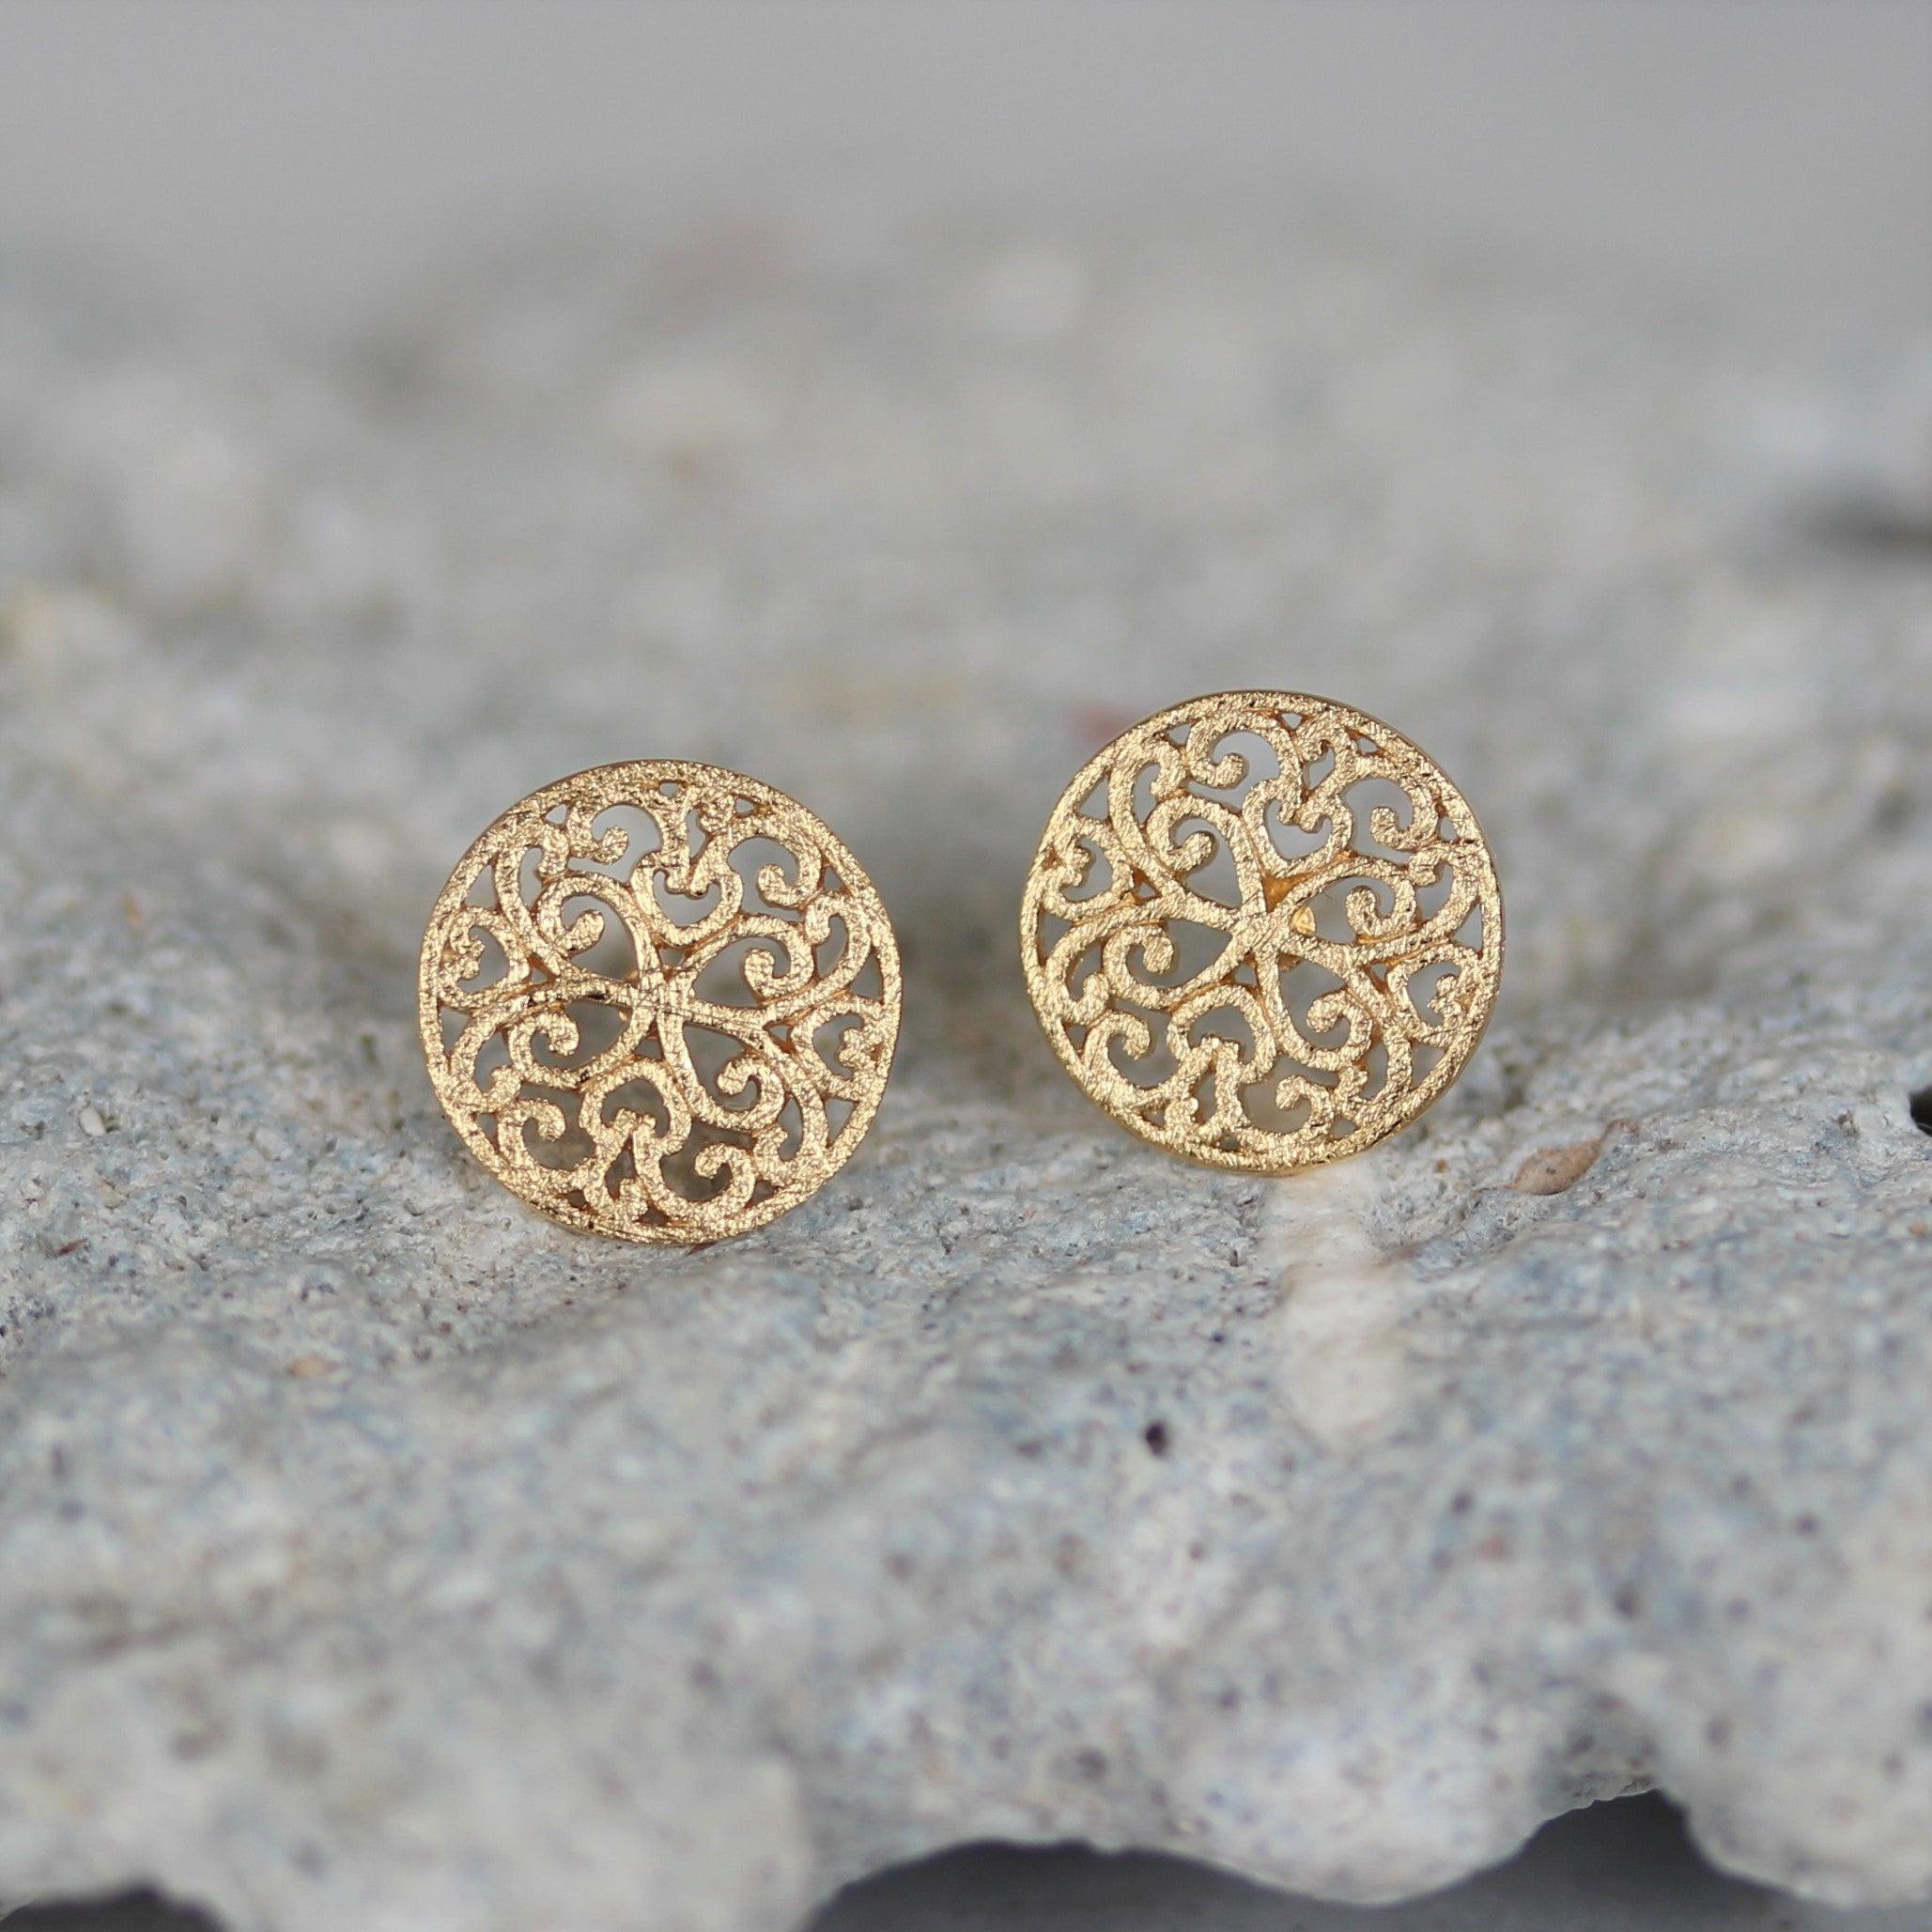 Sterling Silver Yellow Gold Plated 10mm Round Filigree Matte Finish Stud Earrings - STERLING SILVER DESIGNS